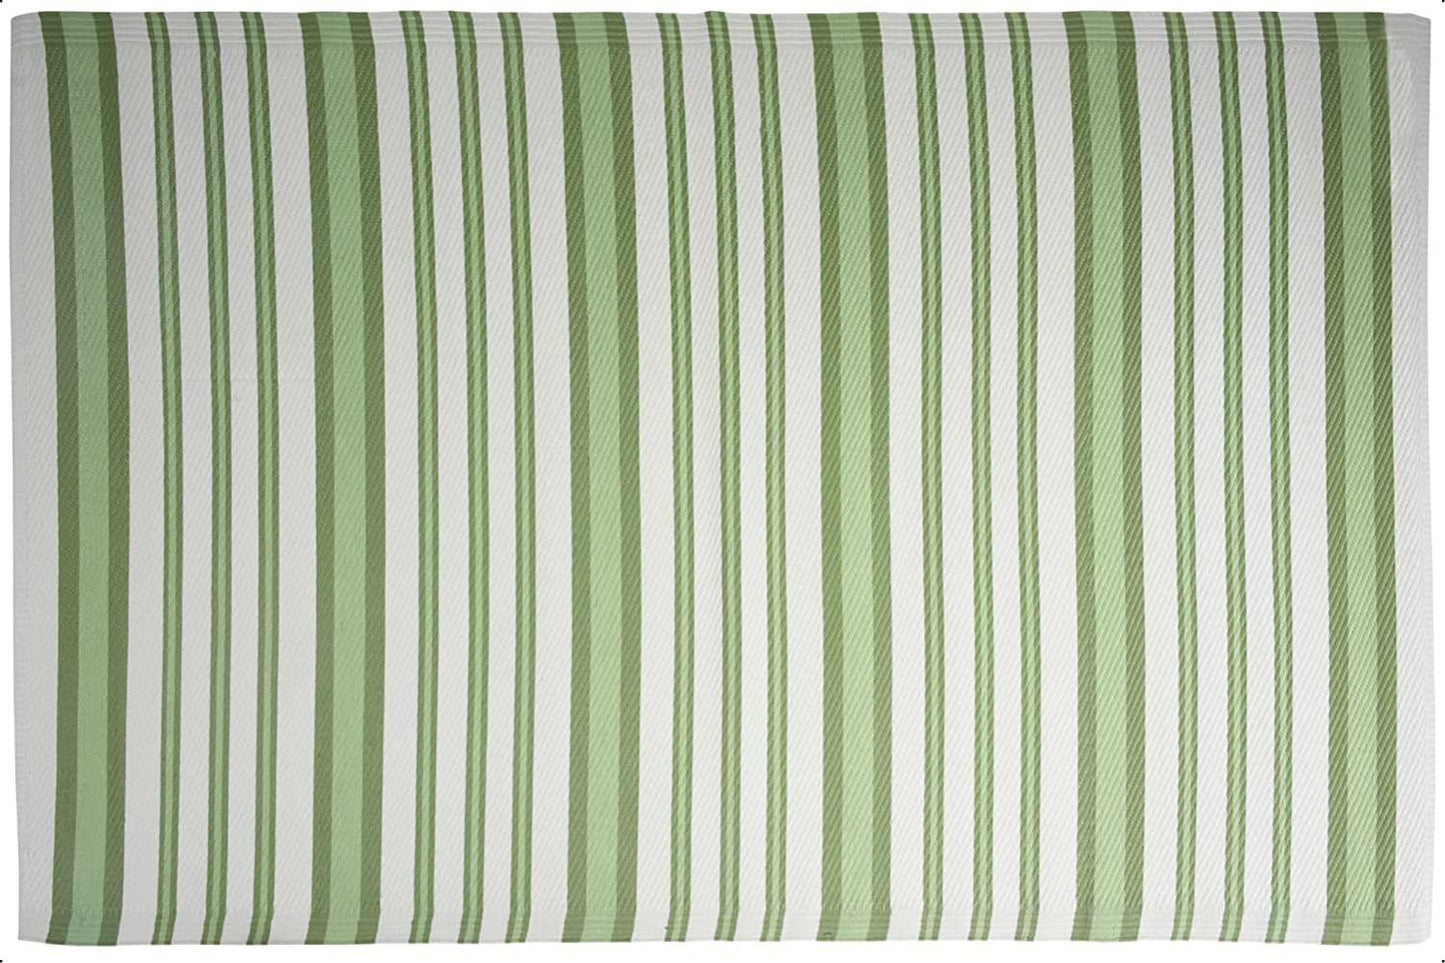 Outdoor Camping Rug Stripes 120 x 180cm Green Blue Grey